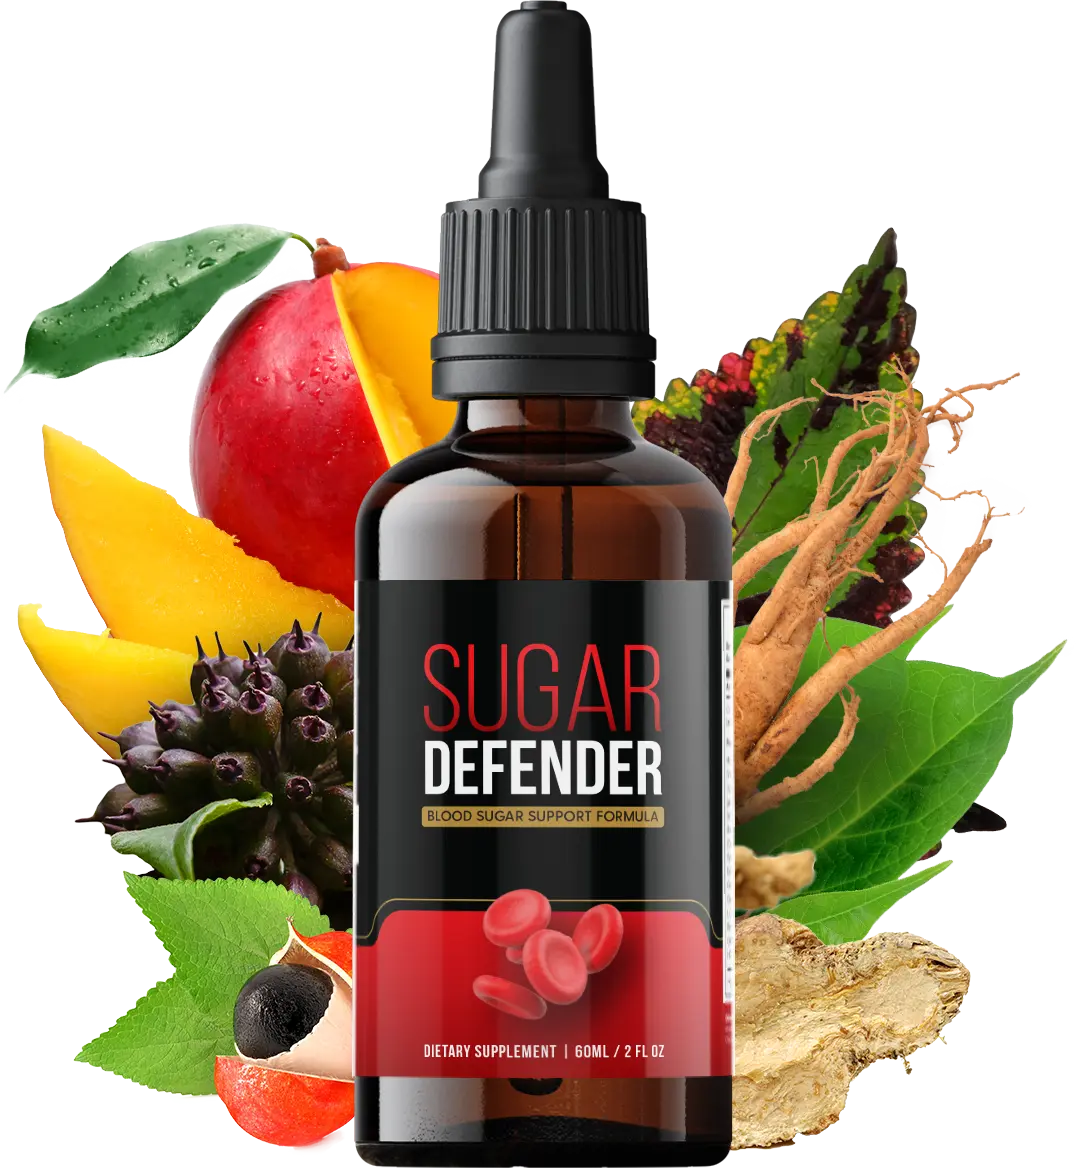 Transform Your Health Naturally with Sugar Defender